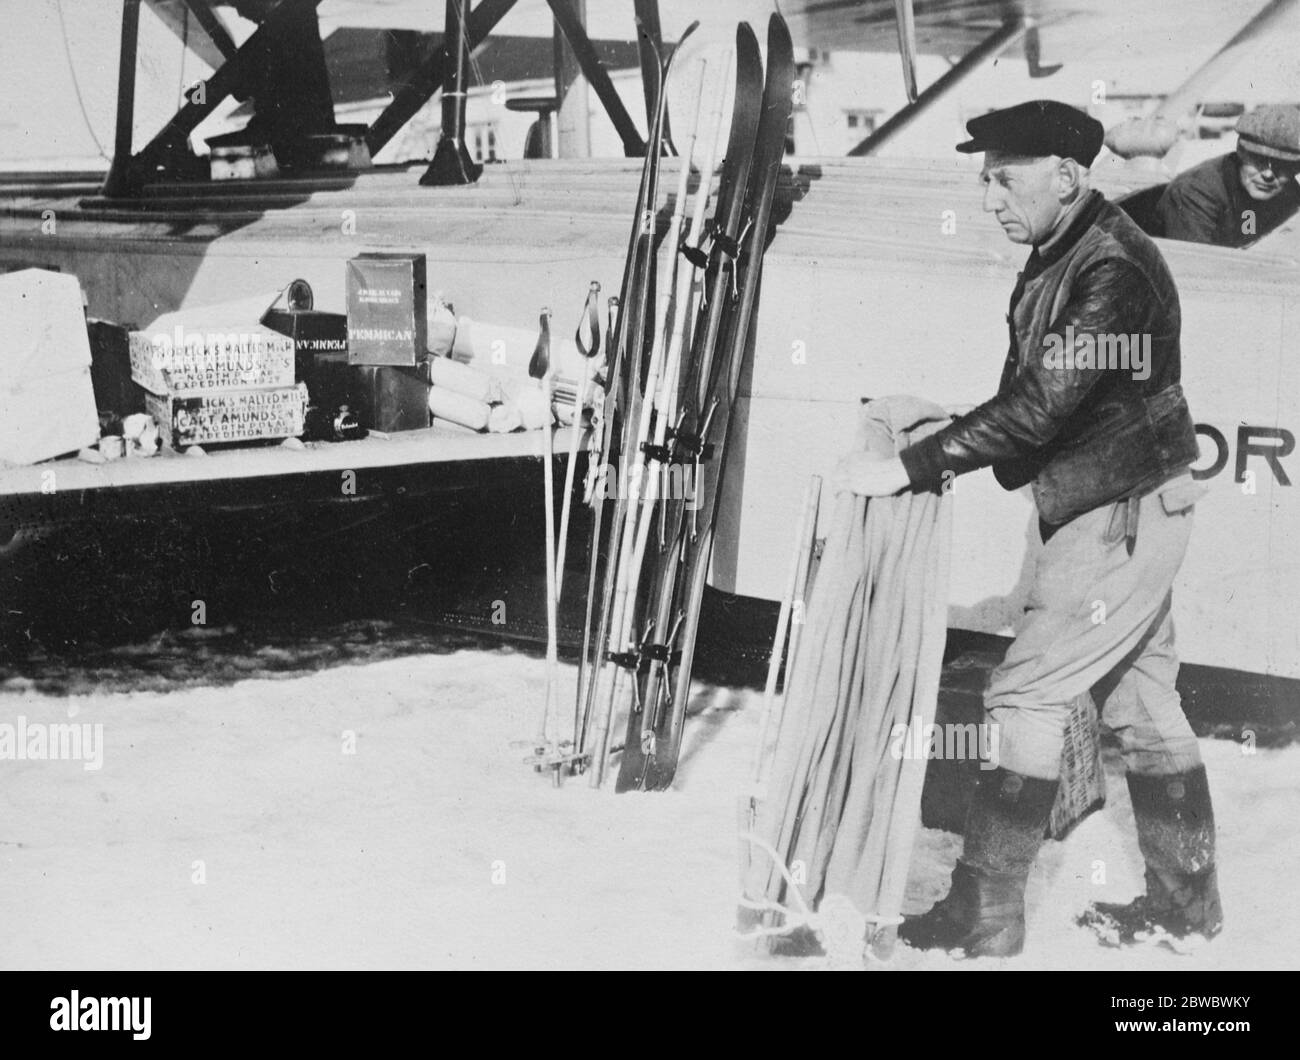 Mystery of Amundsen , first photographs of the start of the Amundsen Ellsworth polar flight Amundsen supervising the loading of food supplies and marching equipment just before the start 17 June 1925 Stock Photo